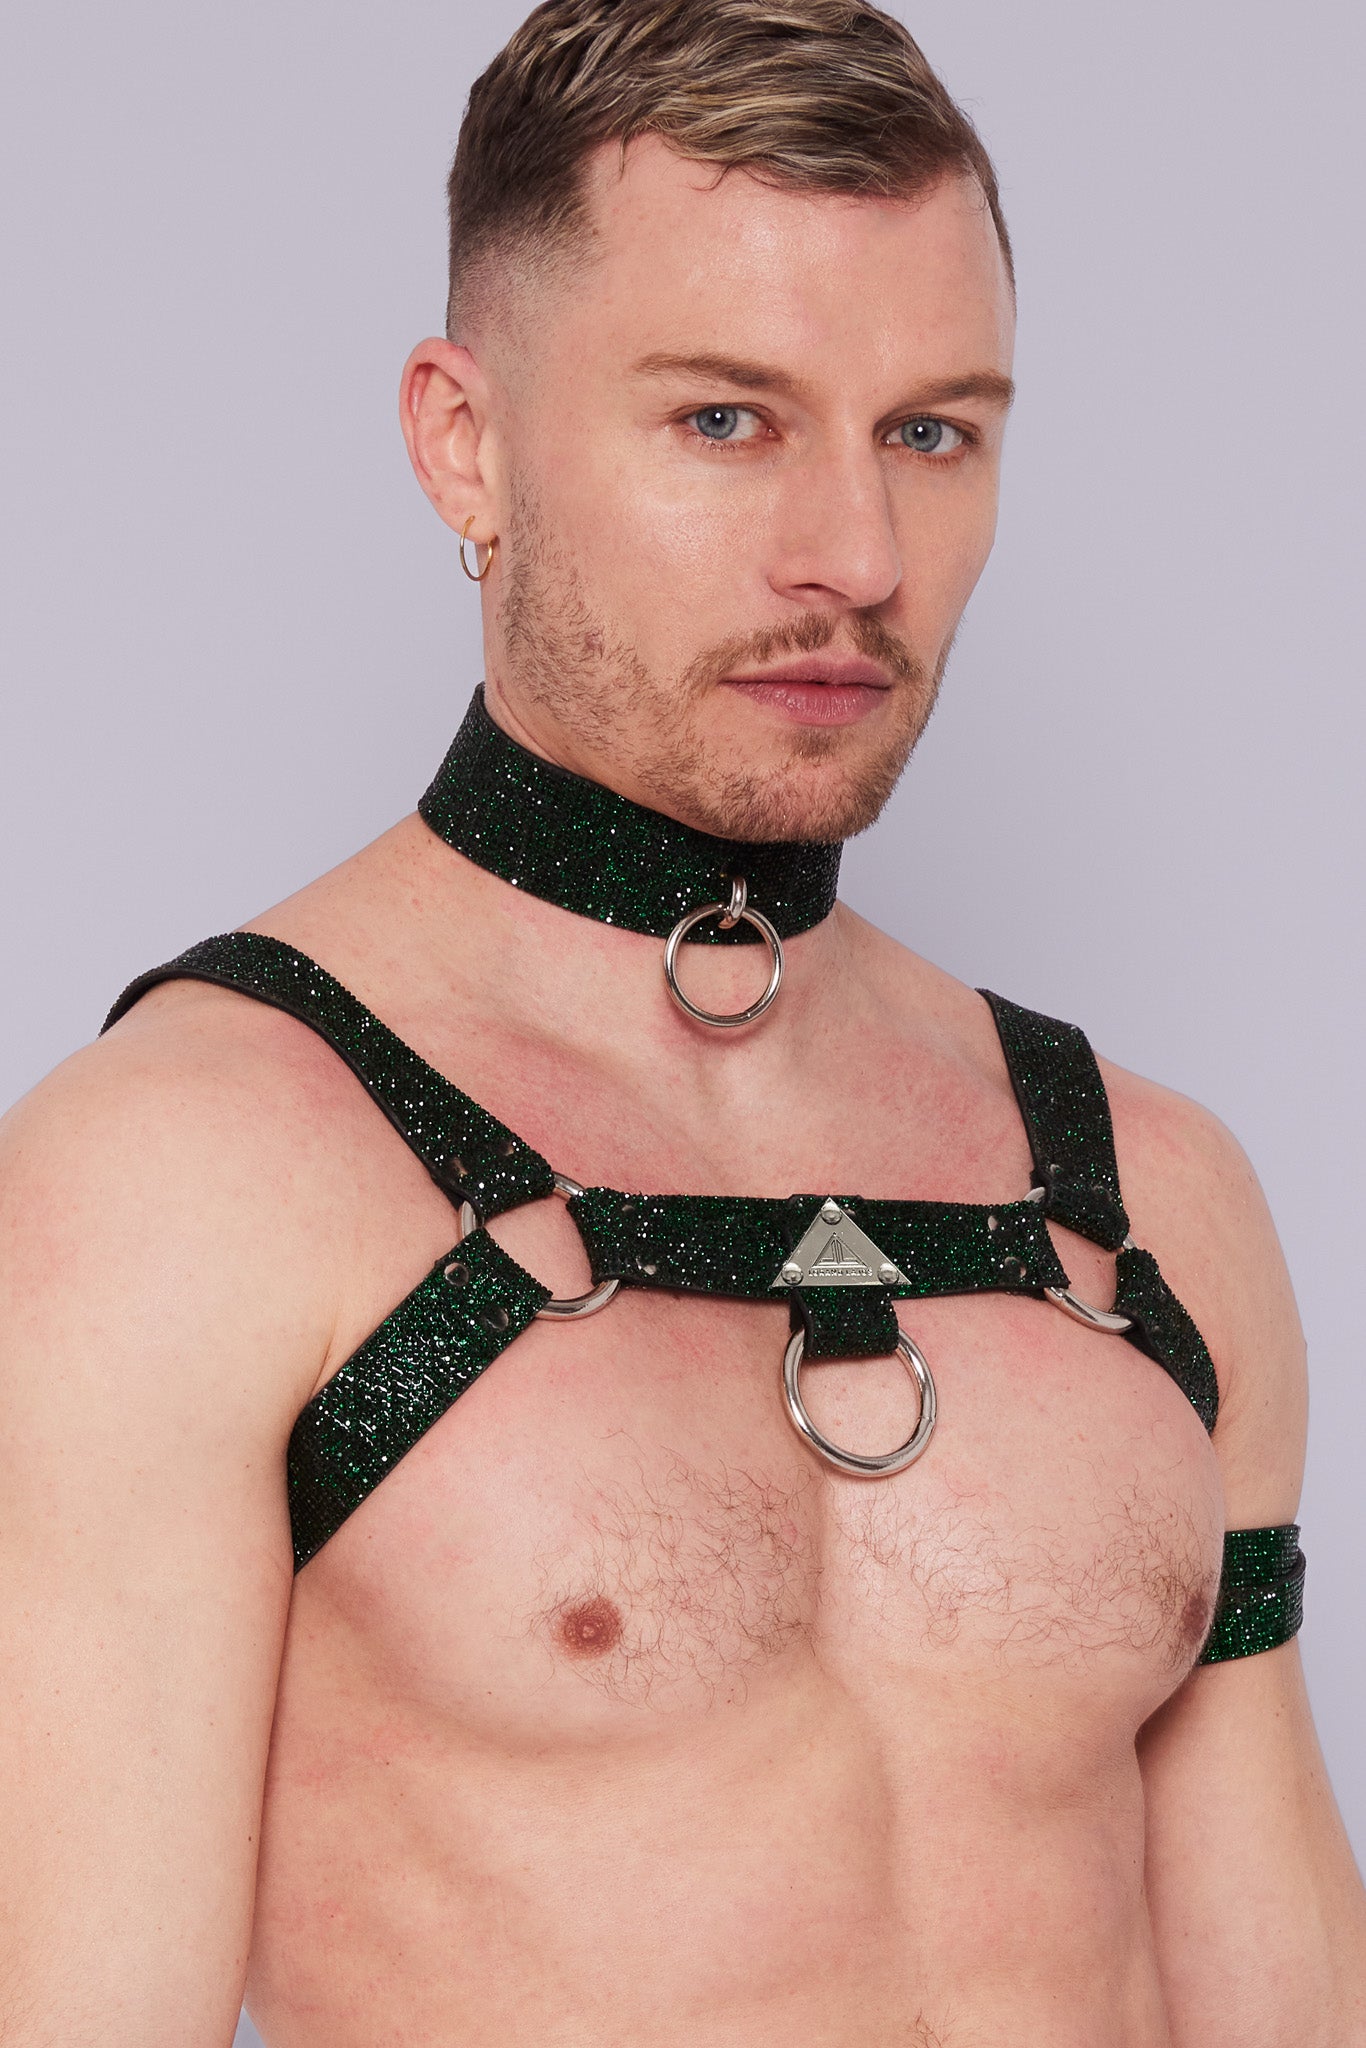 Luxurious emerald green crystal H-Harness, adding a touch of opulence and glamour to your ensemble at gay nightlife events.